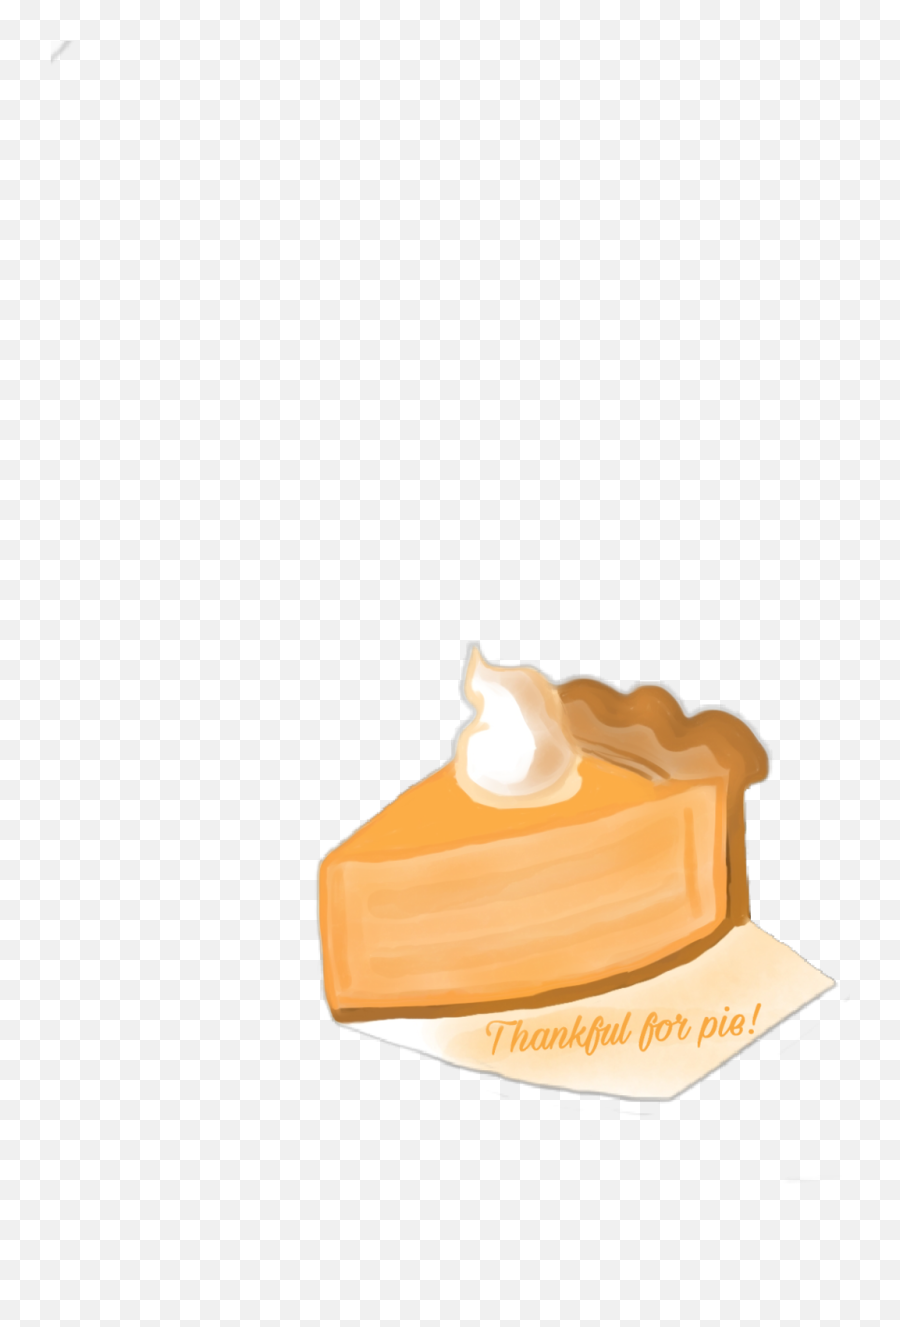 Transparent Pumpkin Pie Slice Clipart - Png Download Full Cake Decorating Supply,Pie Slice Icon